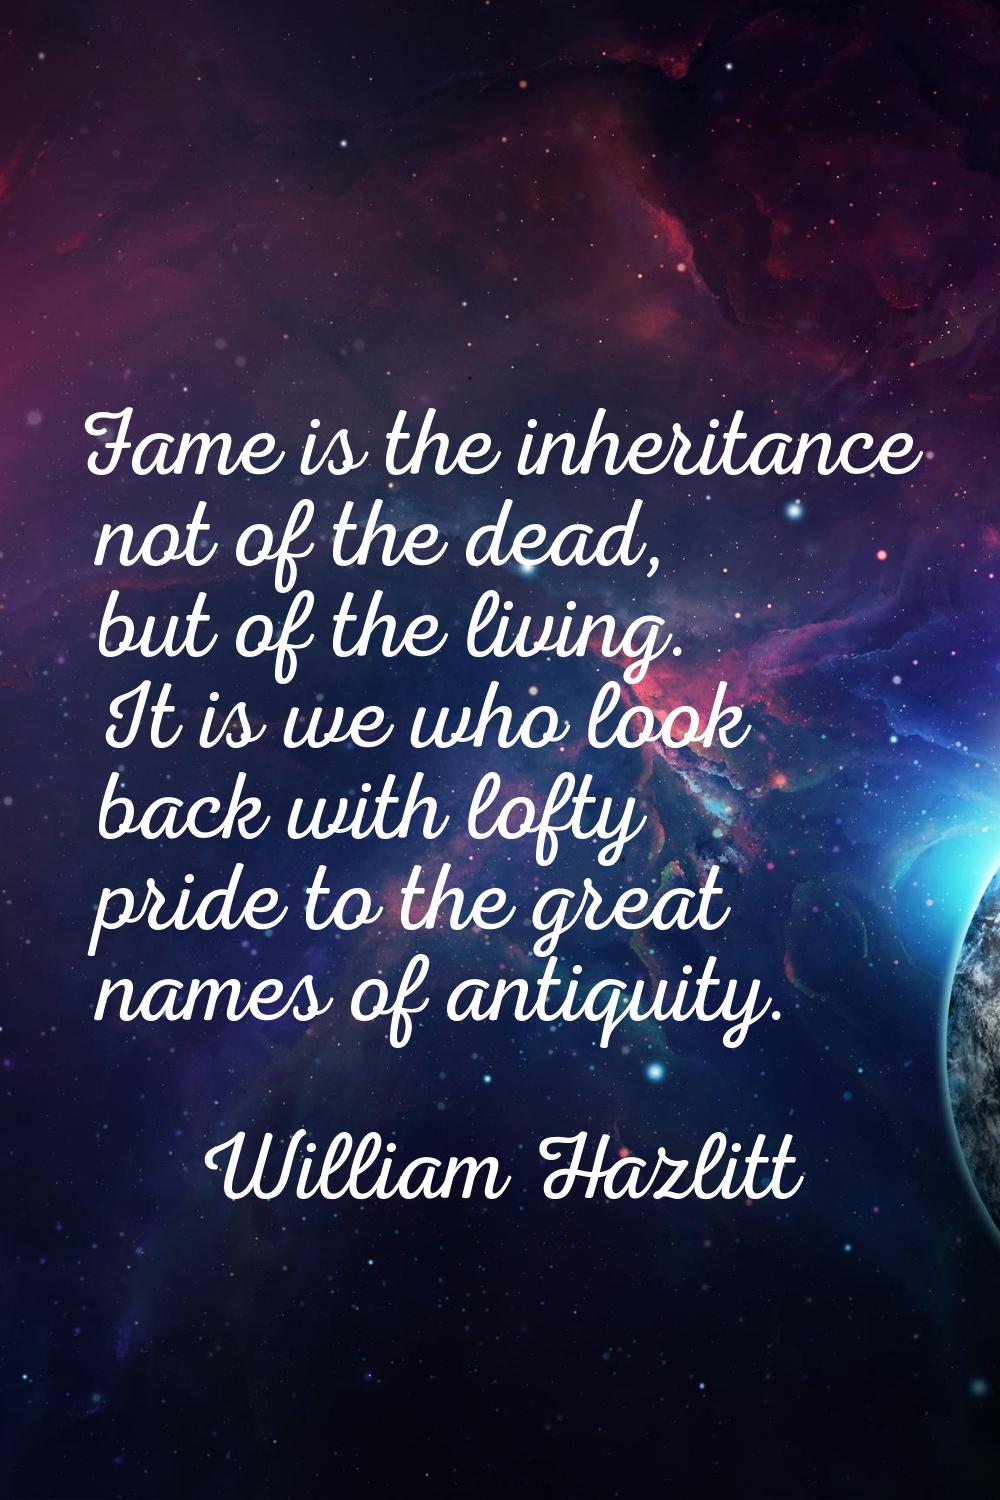 Fame is the inheritance not of the dead, but of the living. It is we who look back with lofty pride